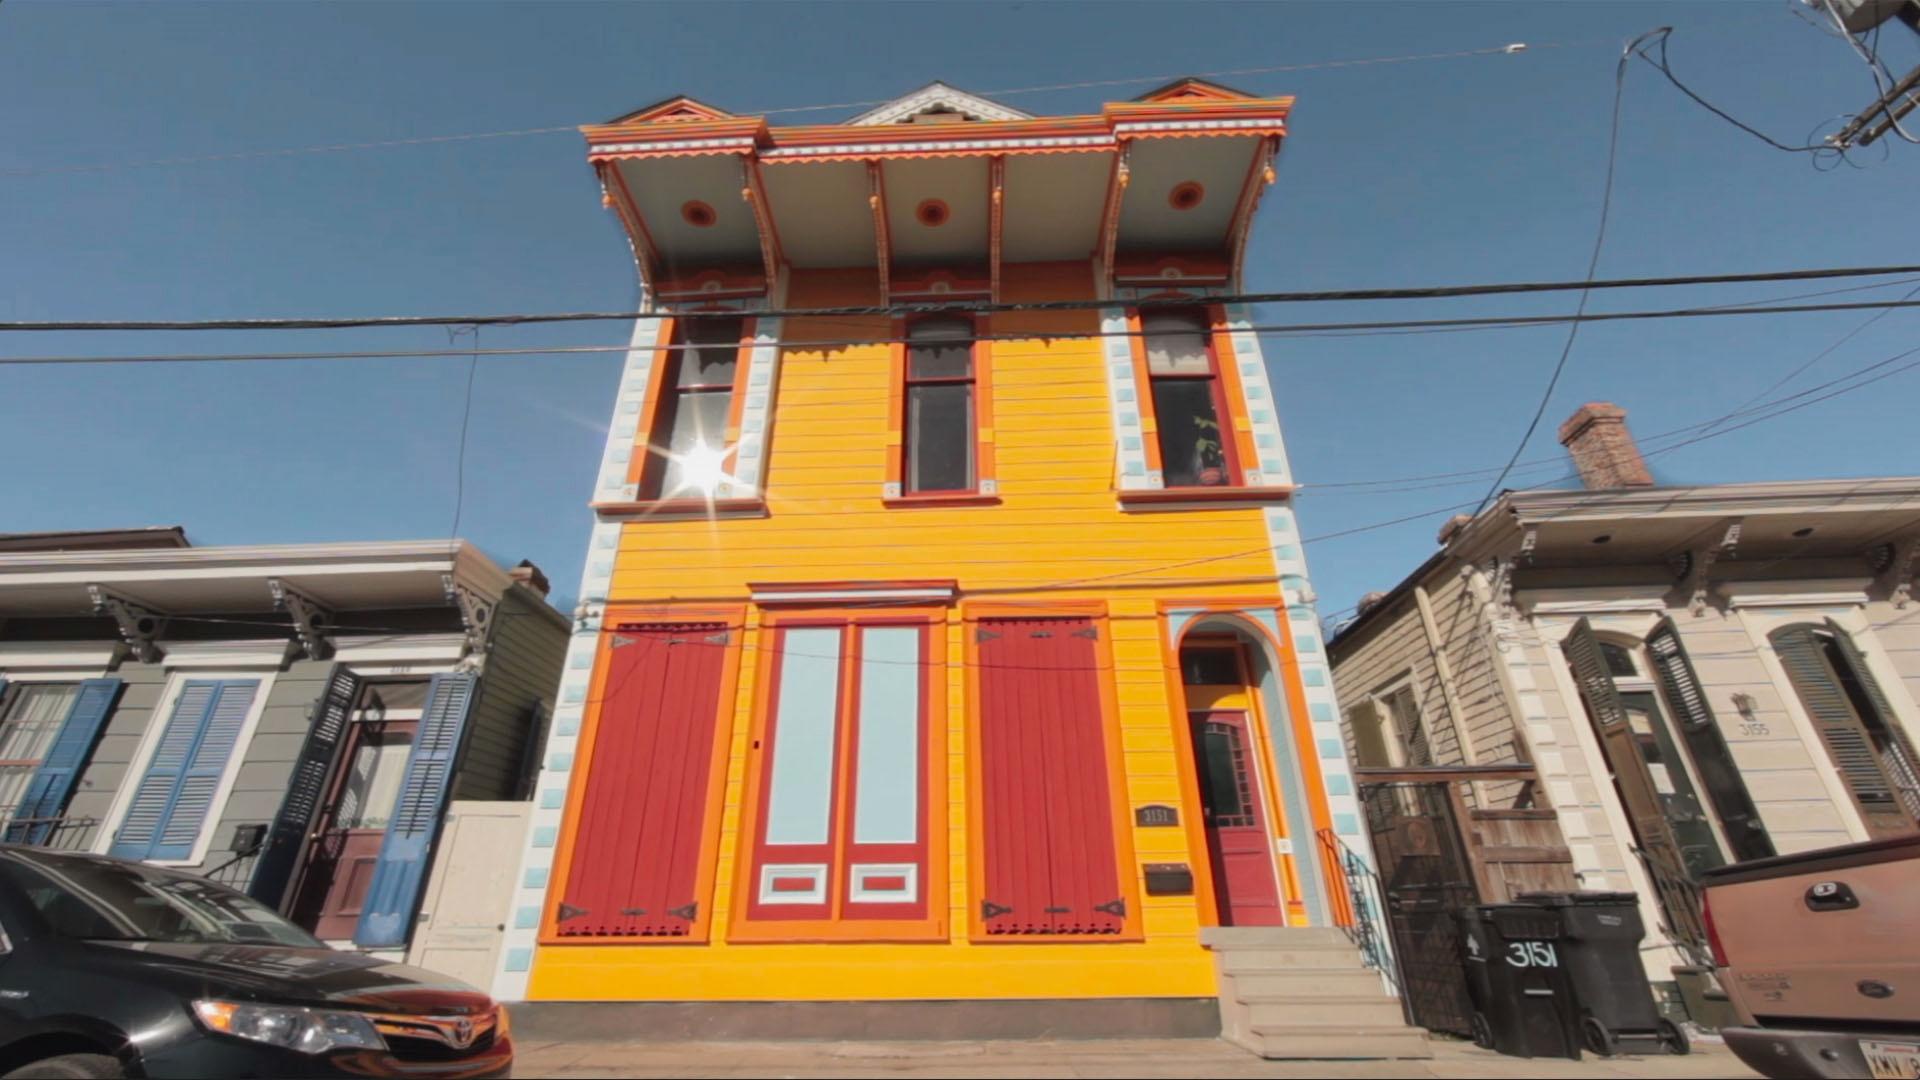 Still image of vibrantly colored house in New Orleans